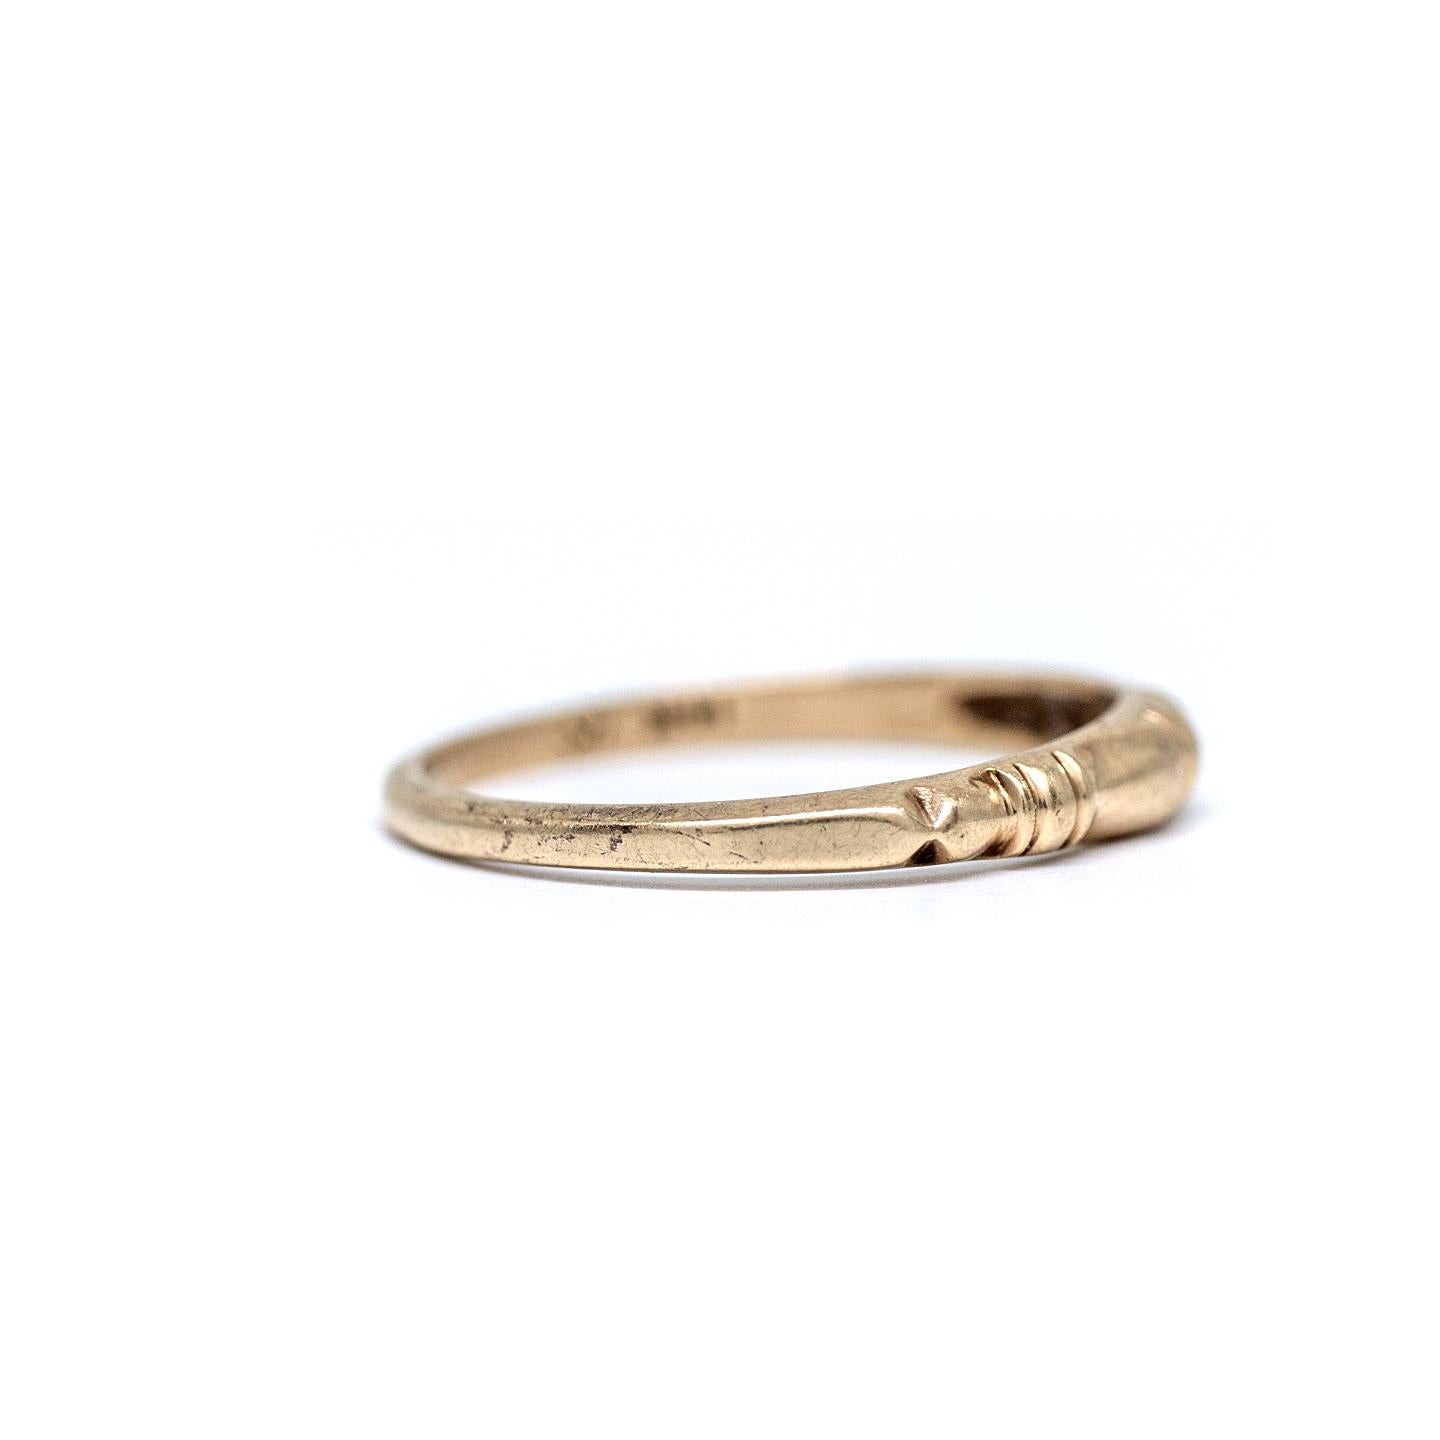 Here we have a genuine vintage wedding band crafted in 14 karat yellow gold! These yellow gold vintage bands are tougher to find and this one is in great condition! This beautiful ring makes for a great band to pair with your vintage engagement ring